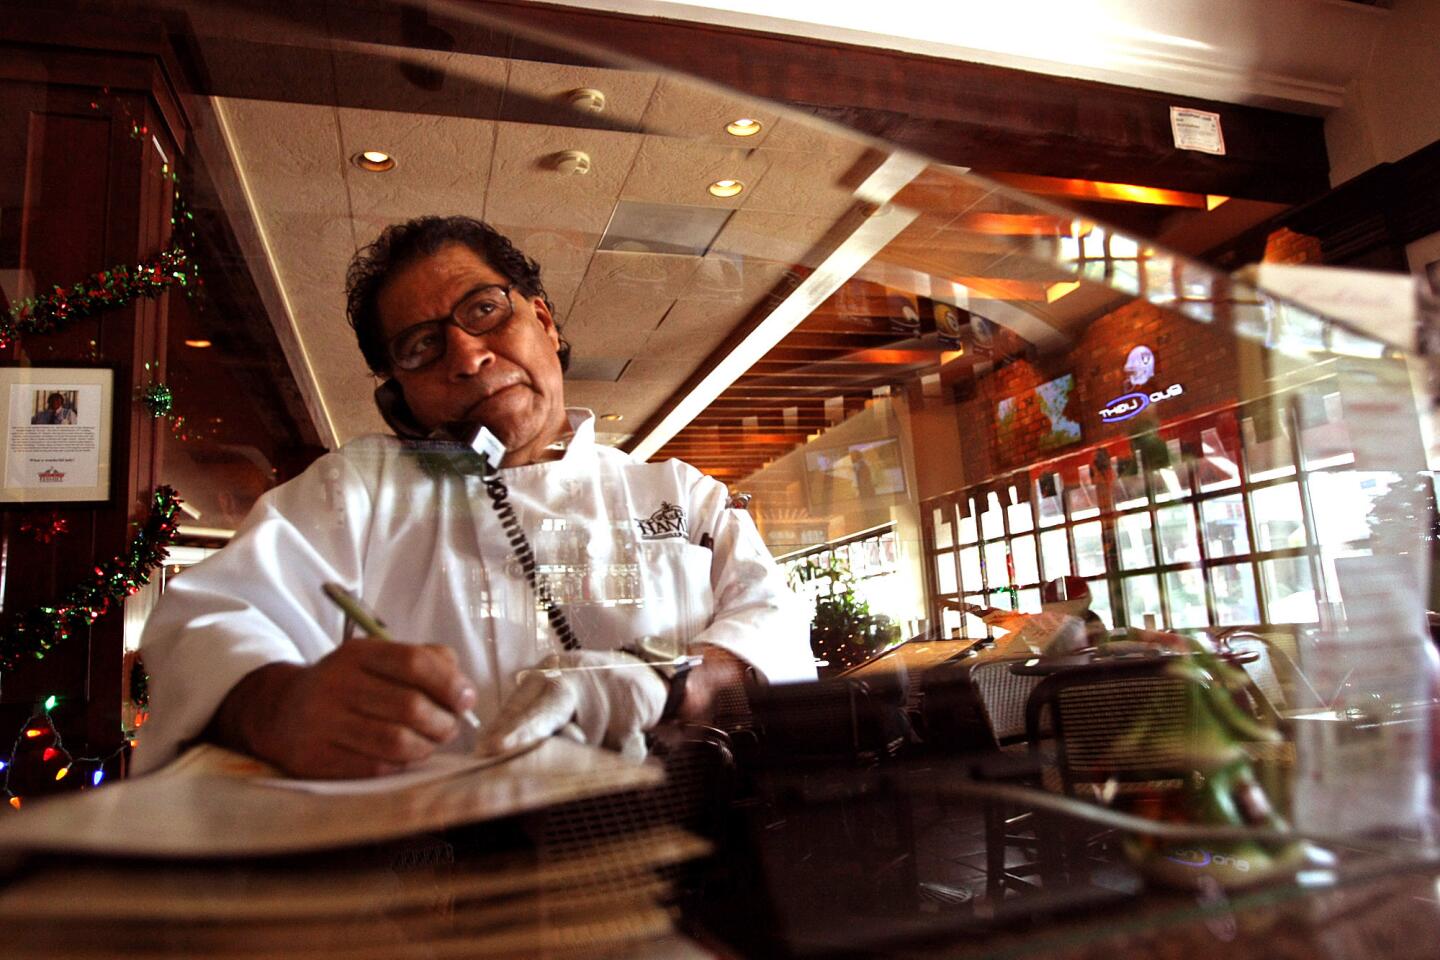 Marcelino Martinez, 61, answers the phone at the Hamburger Hamlet he manages in Sherman Oaks. Martinez has spent 43 years at the once-prosperous chain that changed his life and the lives of many other Zapotec Indians from Oaxaca, Mexico.